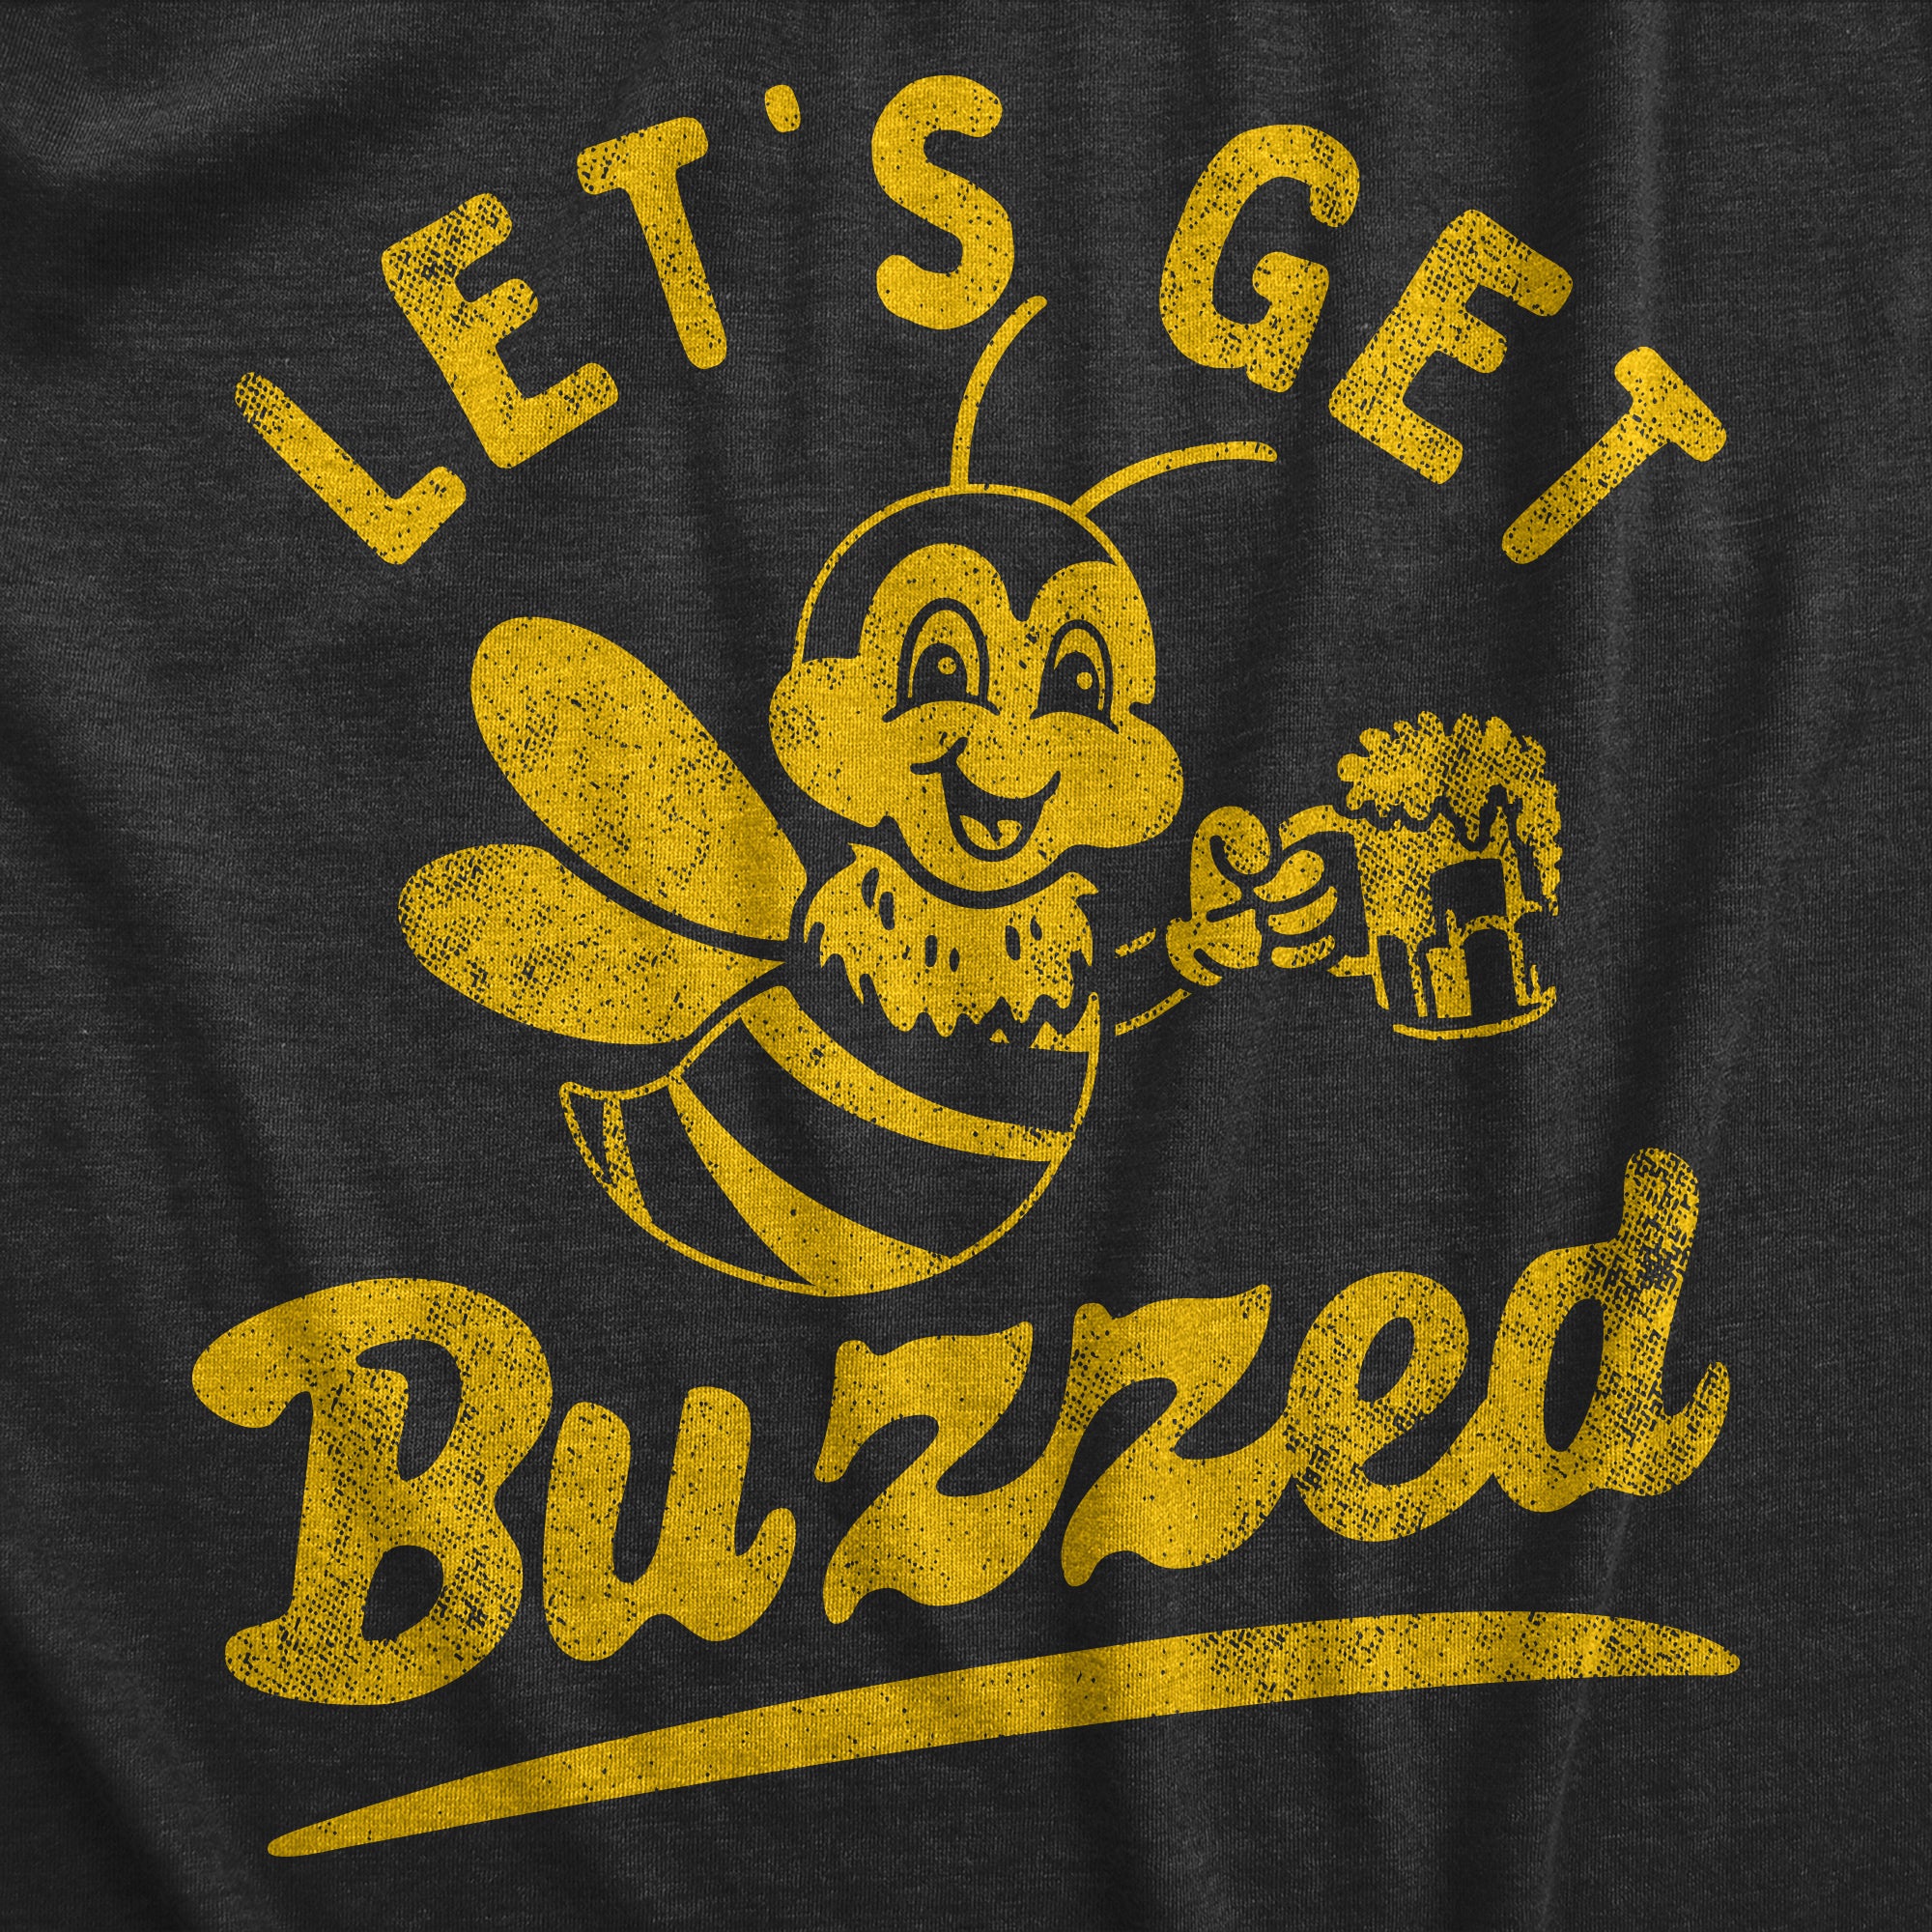 Funny Heather Black - BUZZED Lets Get Buzzed Womens T Shirt Nerdy Drinking sarcastic Tee